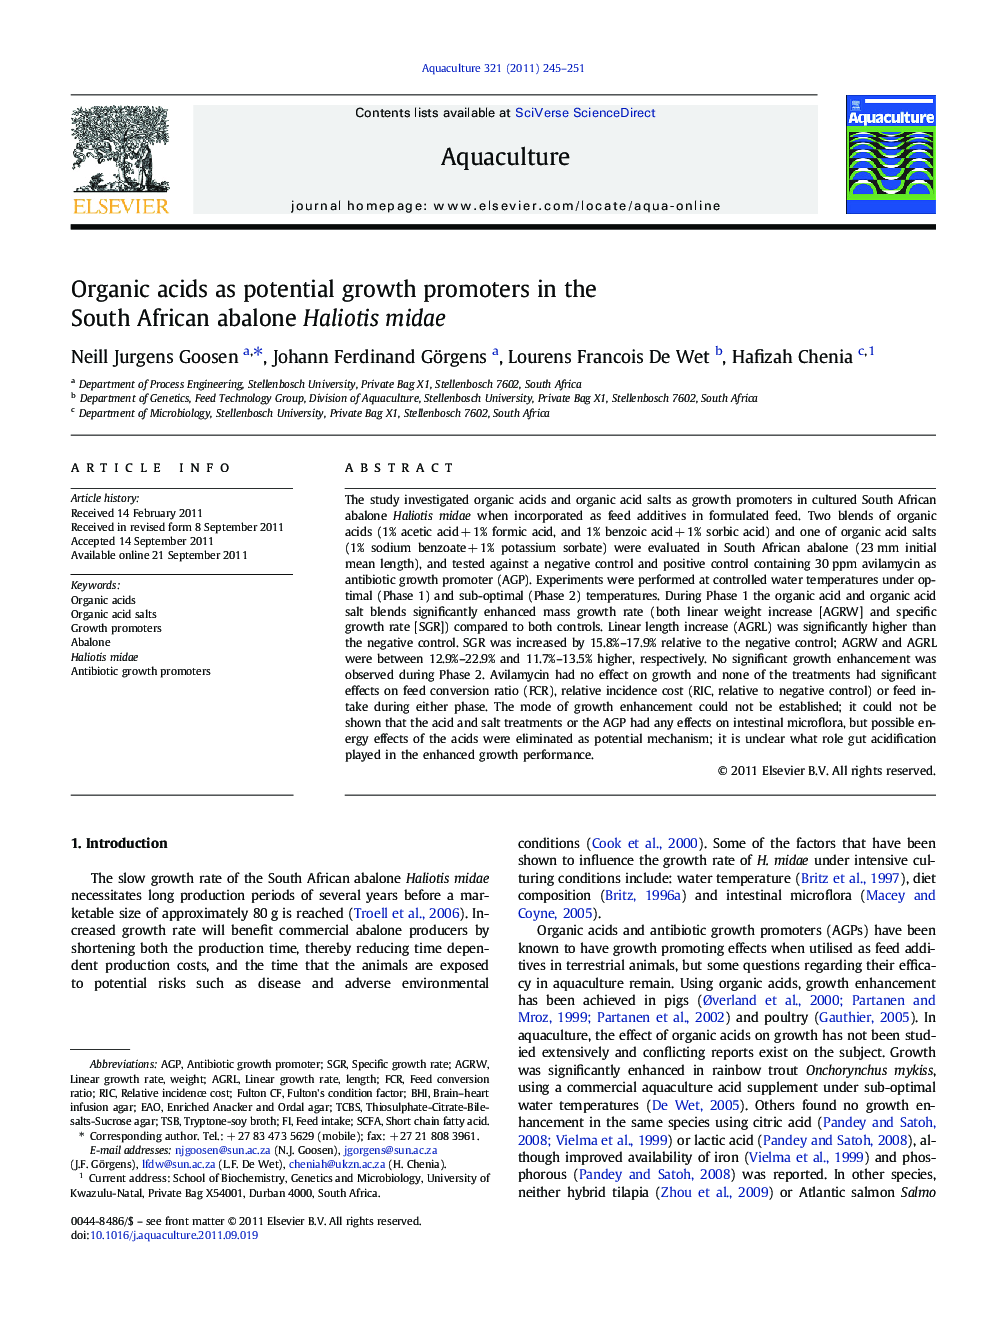 Organic acids as potential growth promoters in the South African abalone Haliotis midae